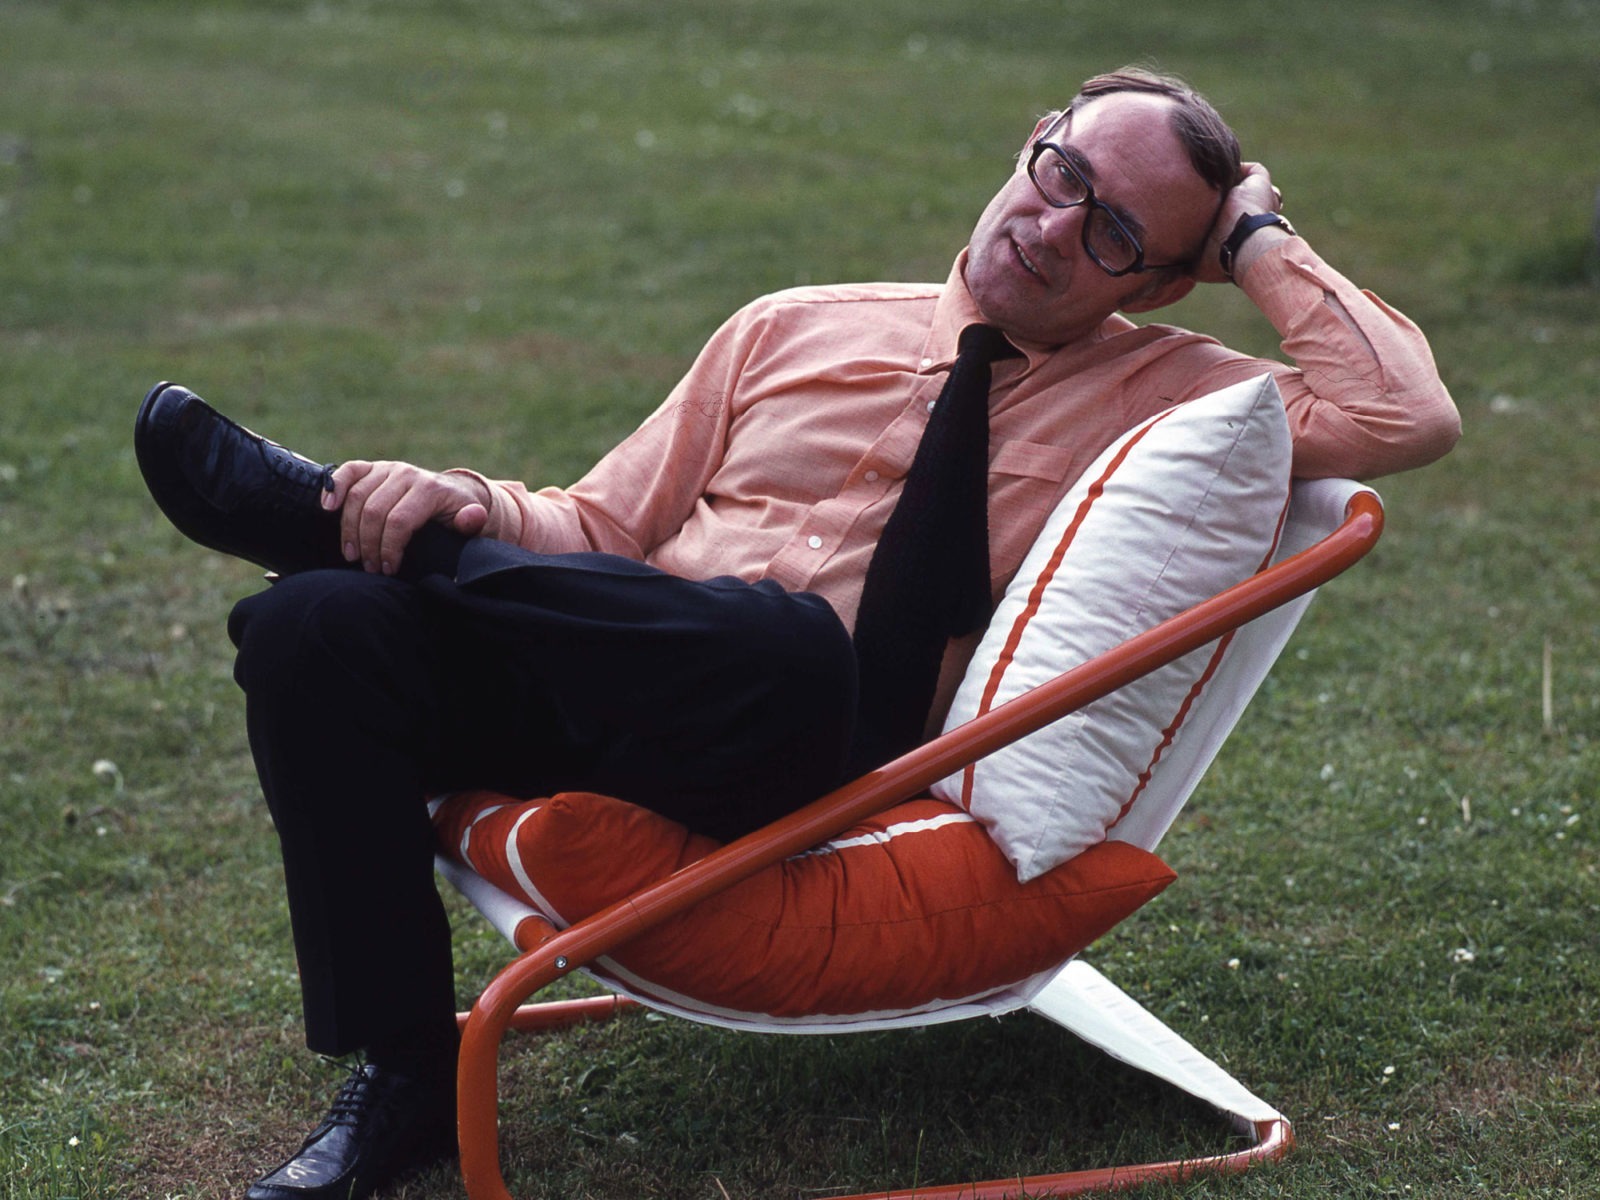 Ingvar Kamprad in pink shirt and black tie, relaxing in a 1970s style red and white chair on a lawn.